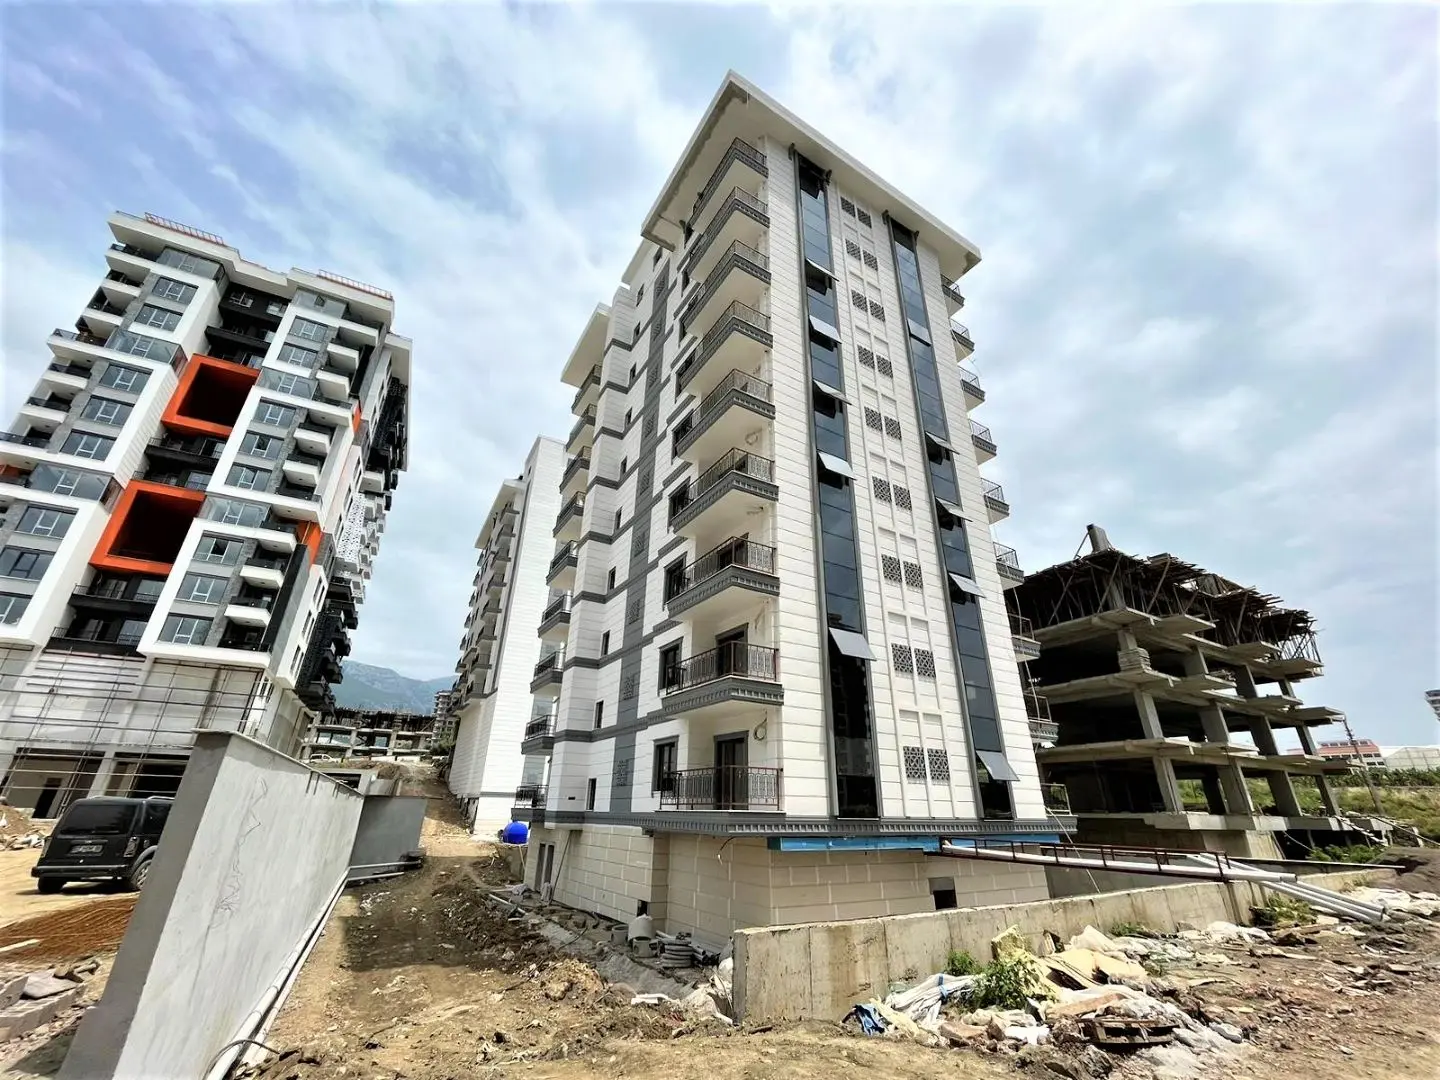 3+1 DUPLEX FLAT IN A NEW AND FULLY ACTIVITY COMPLEX IN MAHMUTLAR